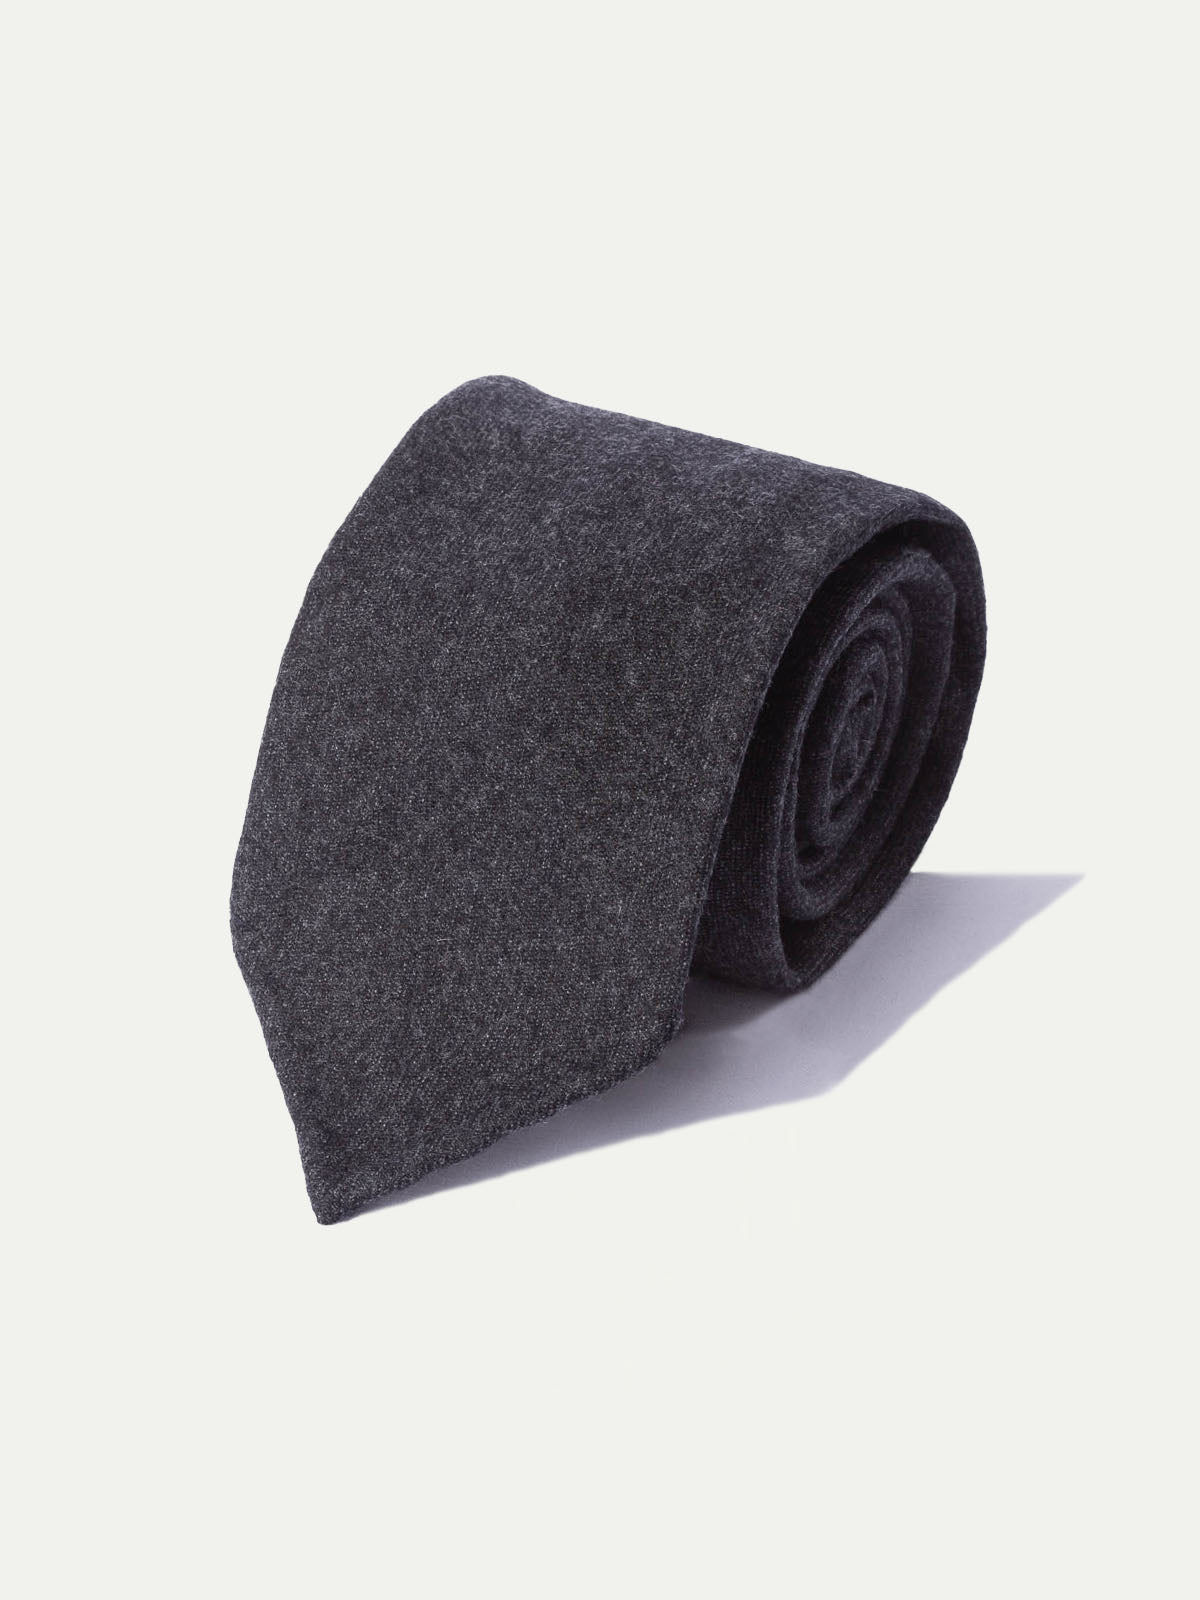 Dark grey flannel tie - Hand Made In Italy